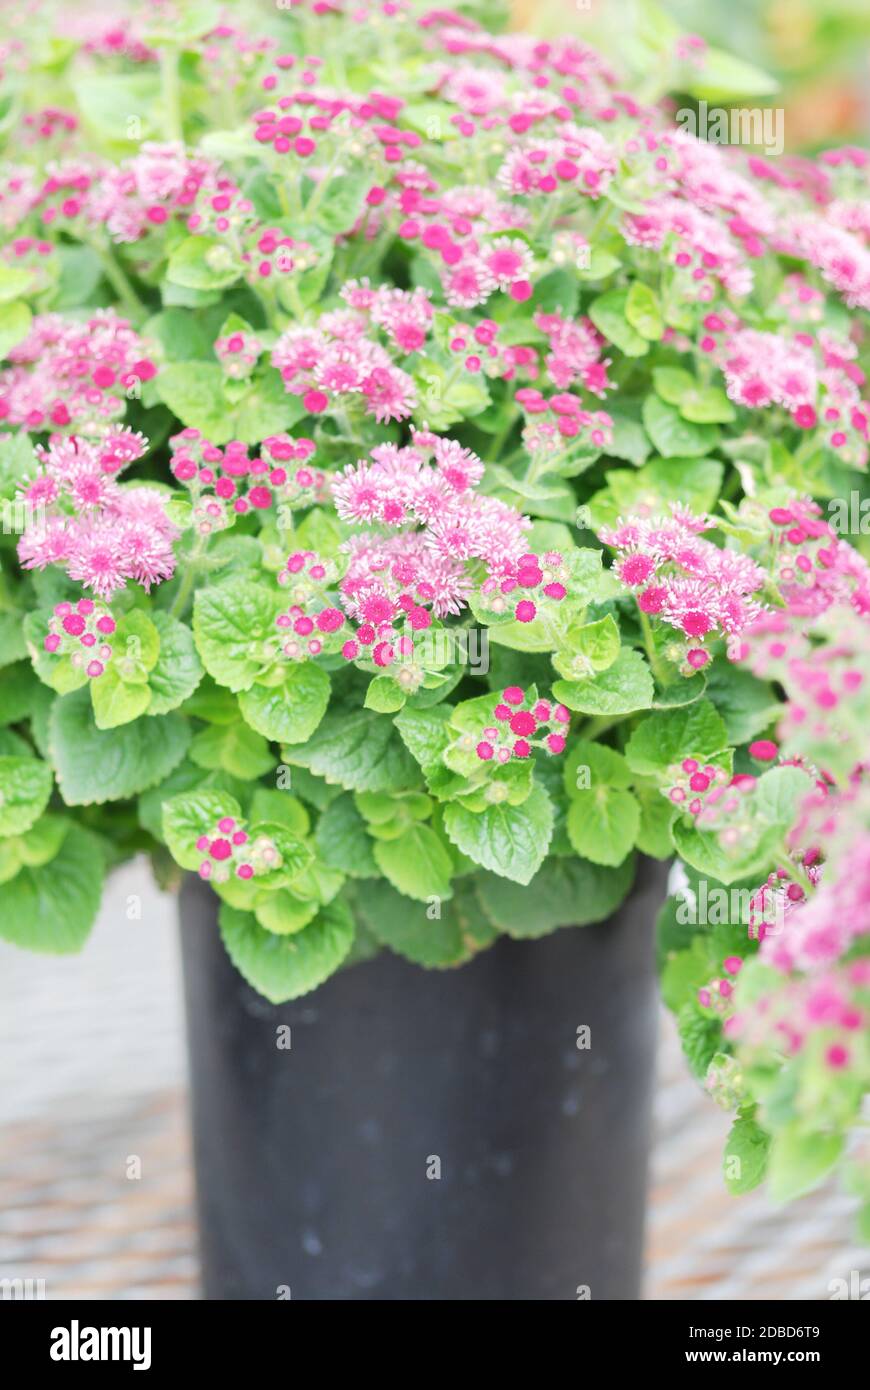 Ageratum, pink ageratum, pink pot plants in the black tray. Stock Photo